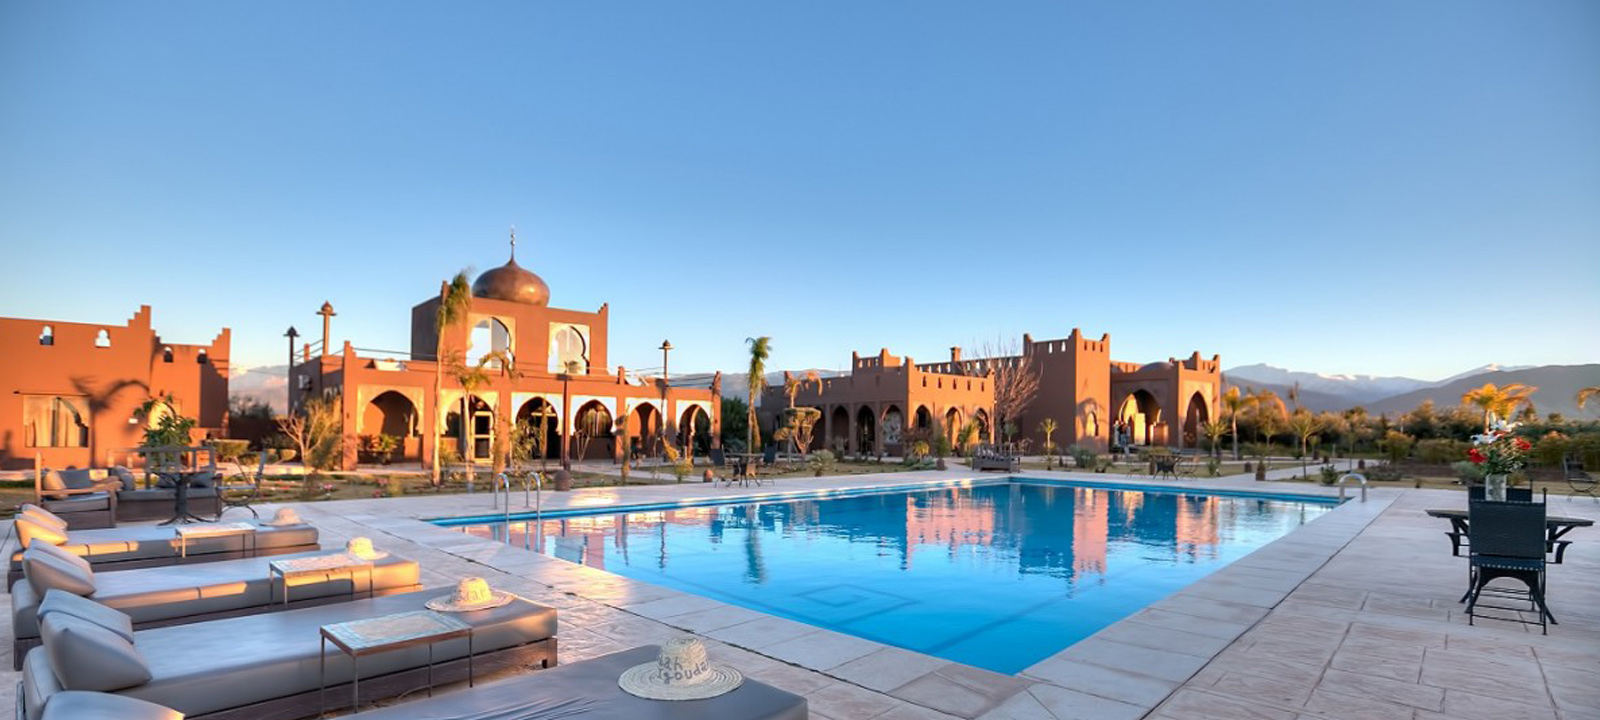 marrakech-vacation-booking-hotels